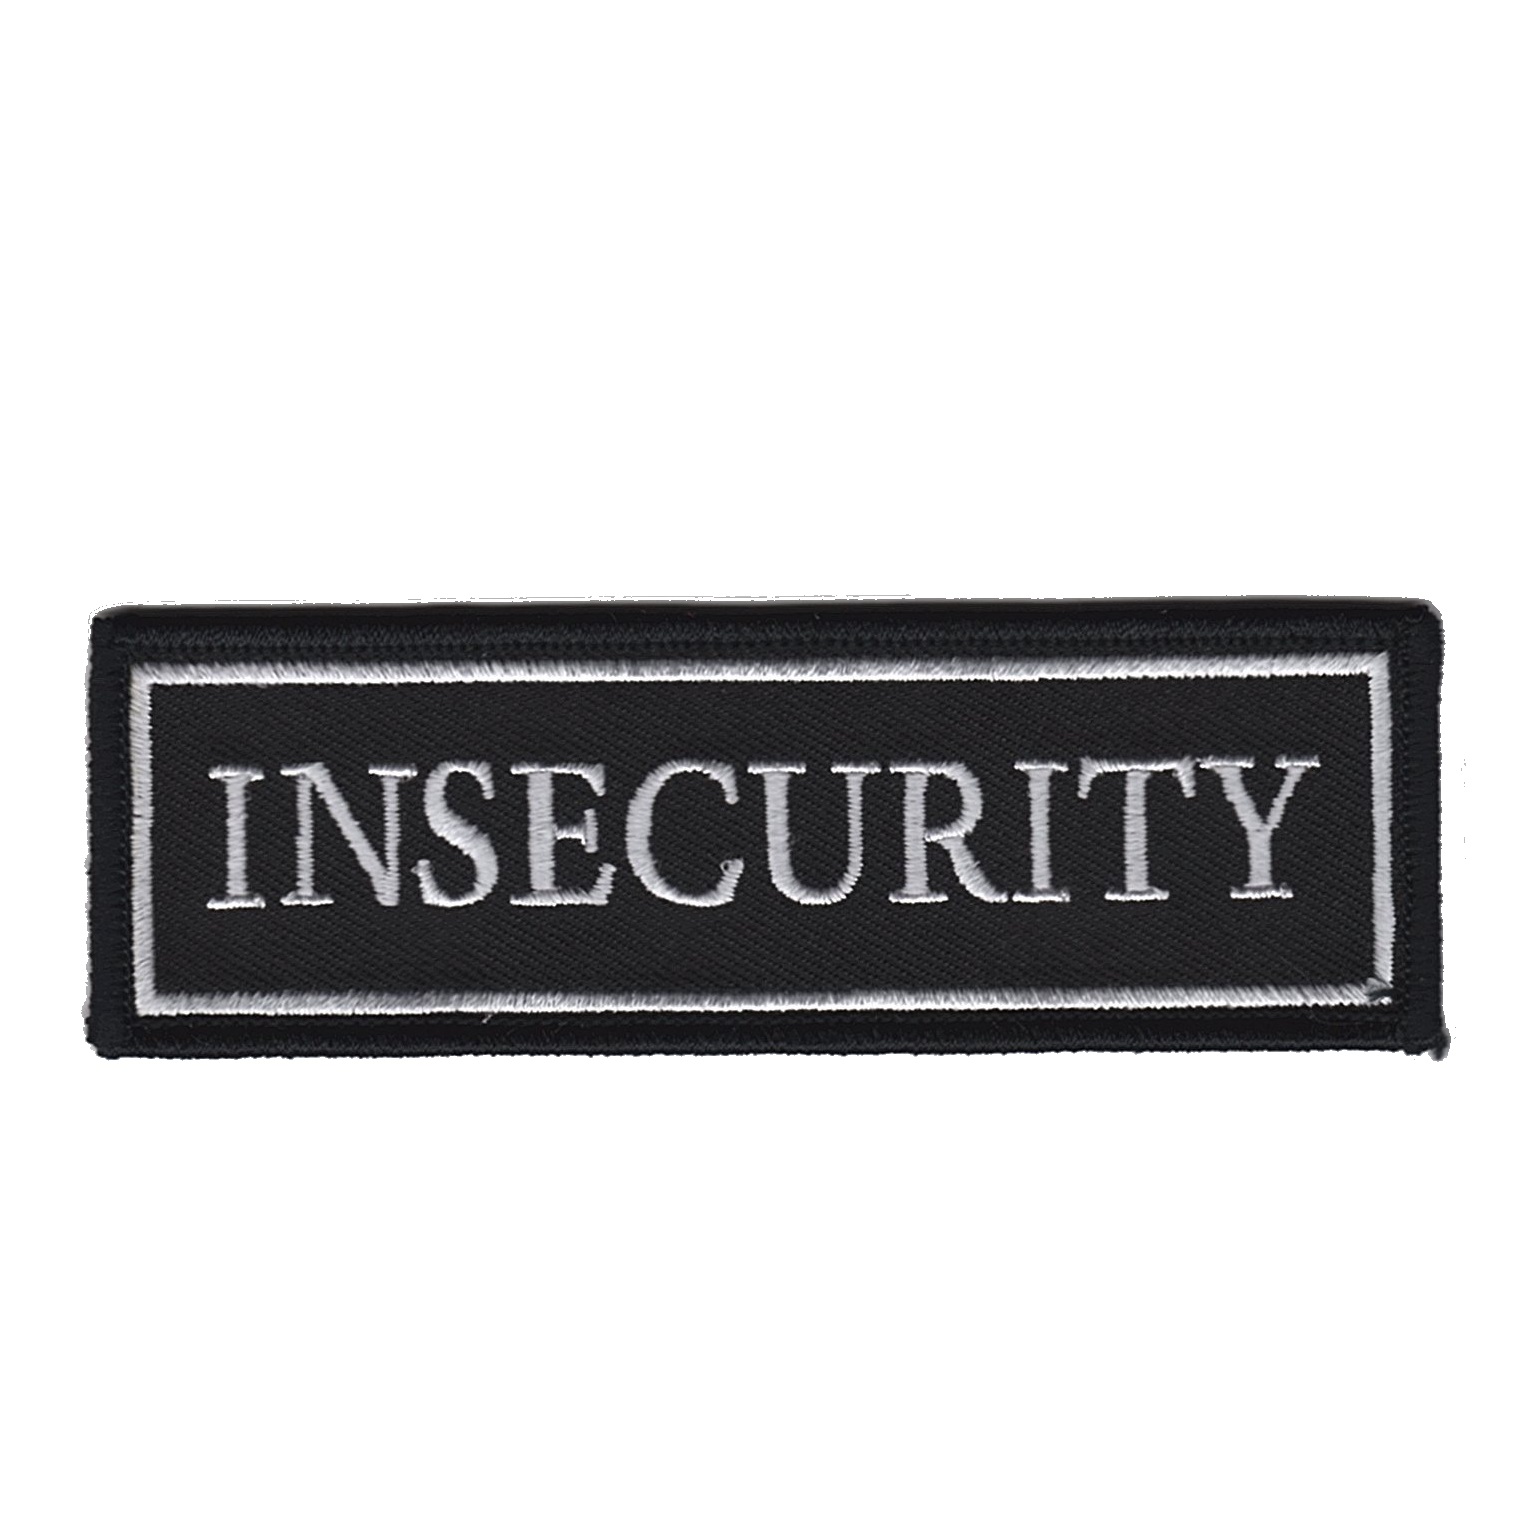 Insecurity